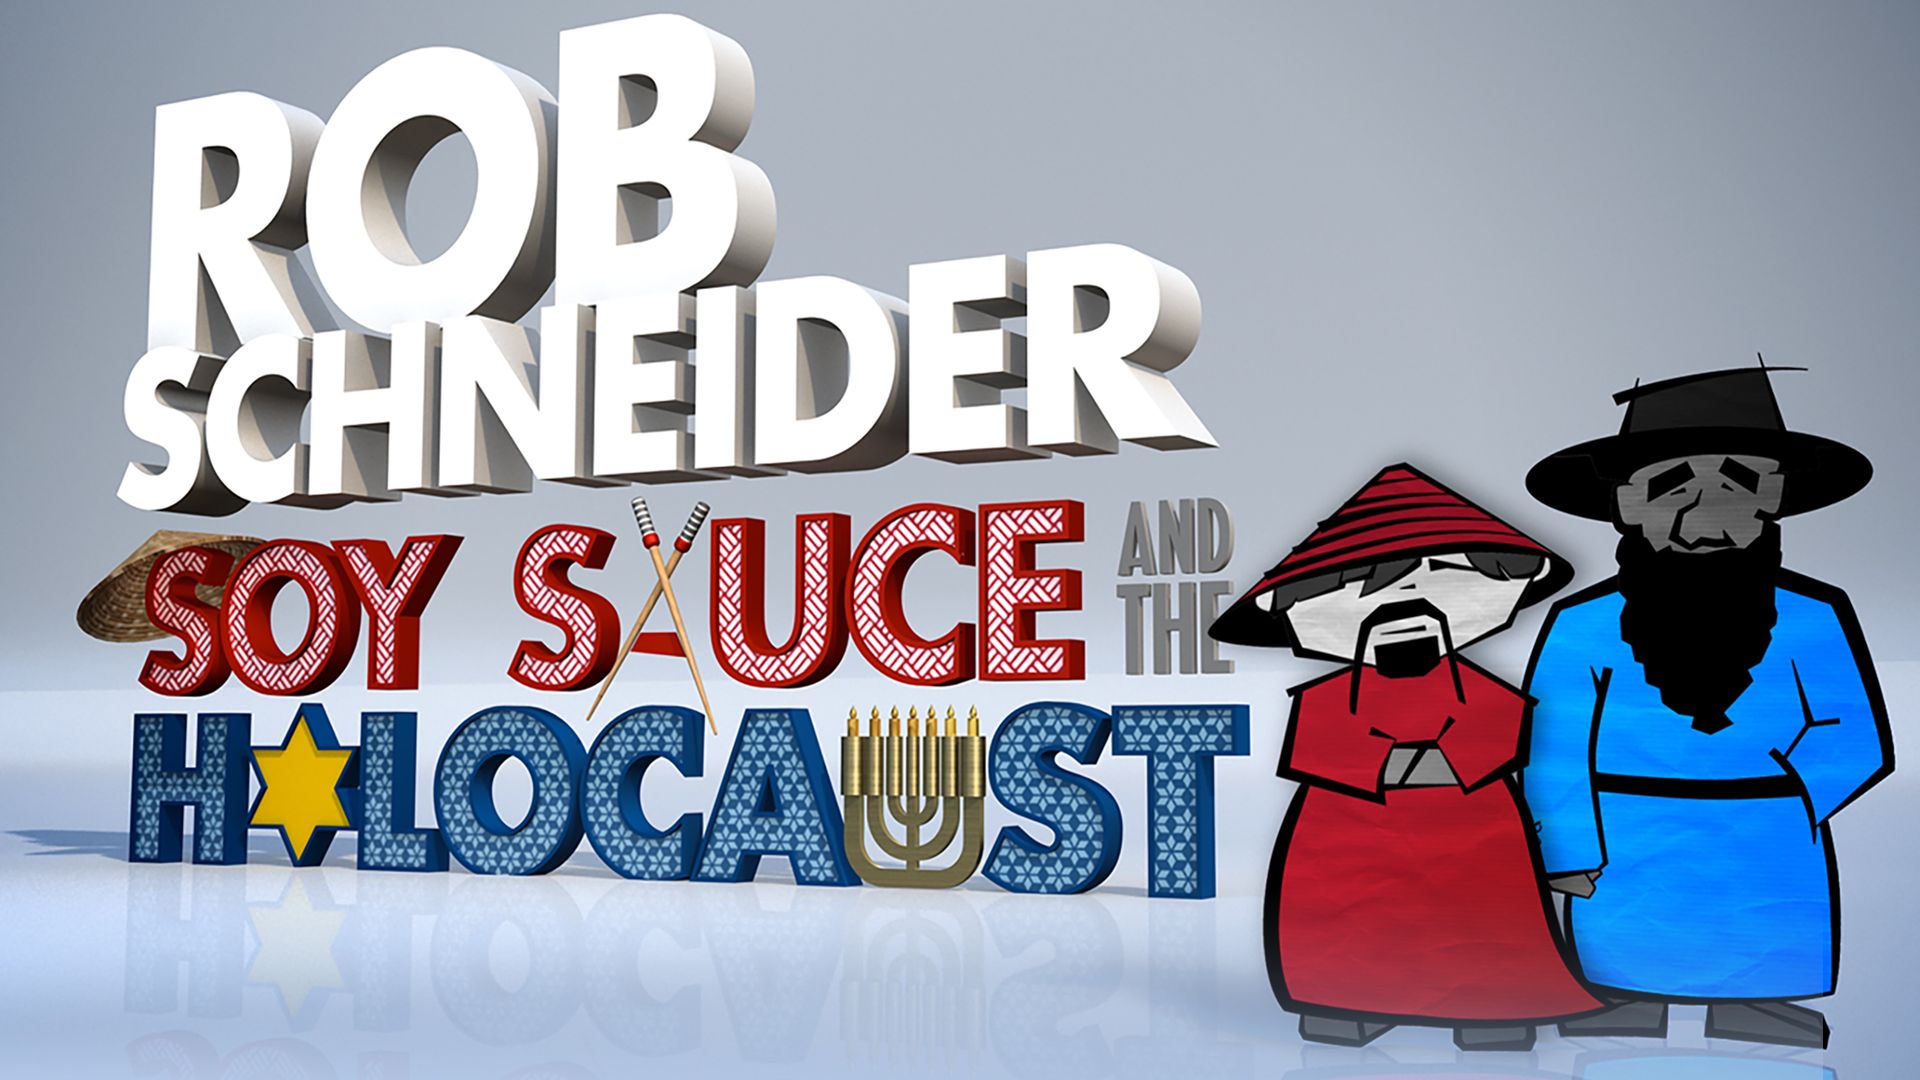 Rob Schneider: Soy Sauce and the Holocaust Backdrop